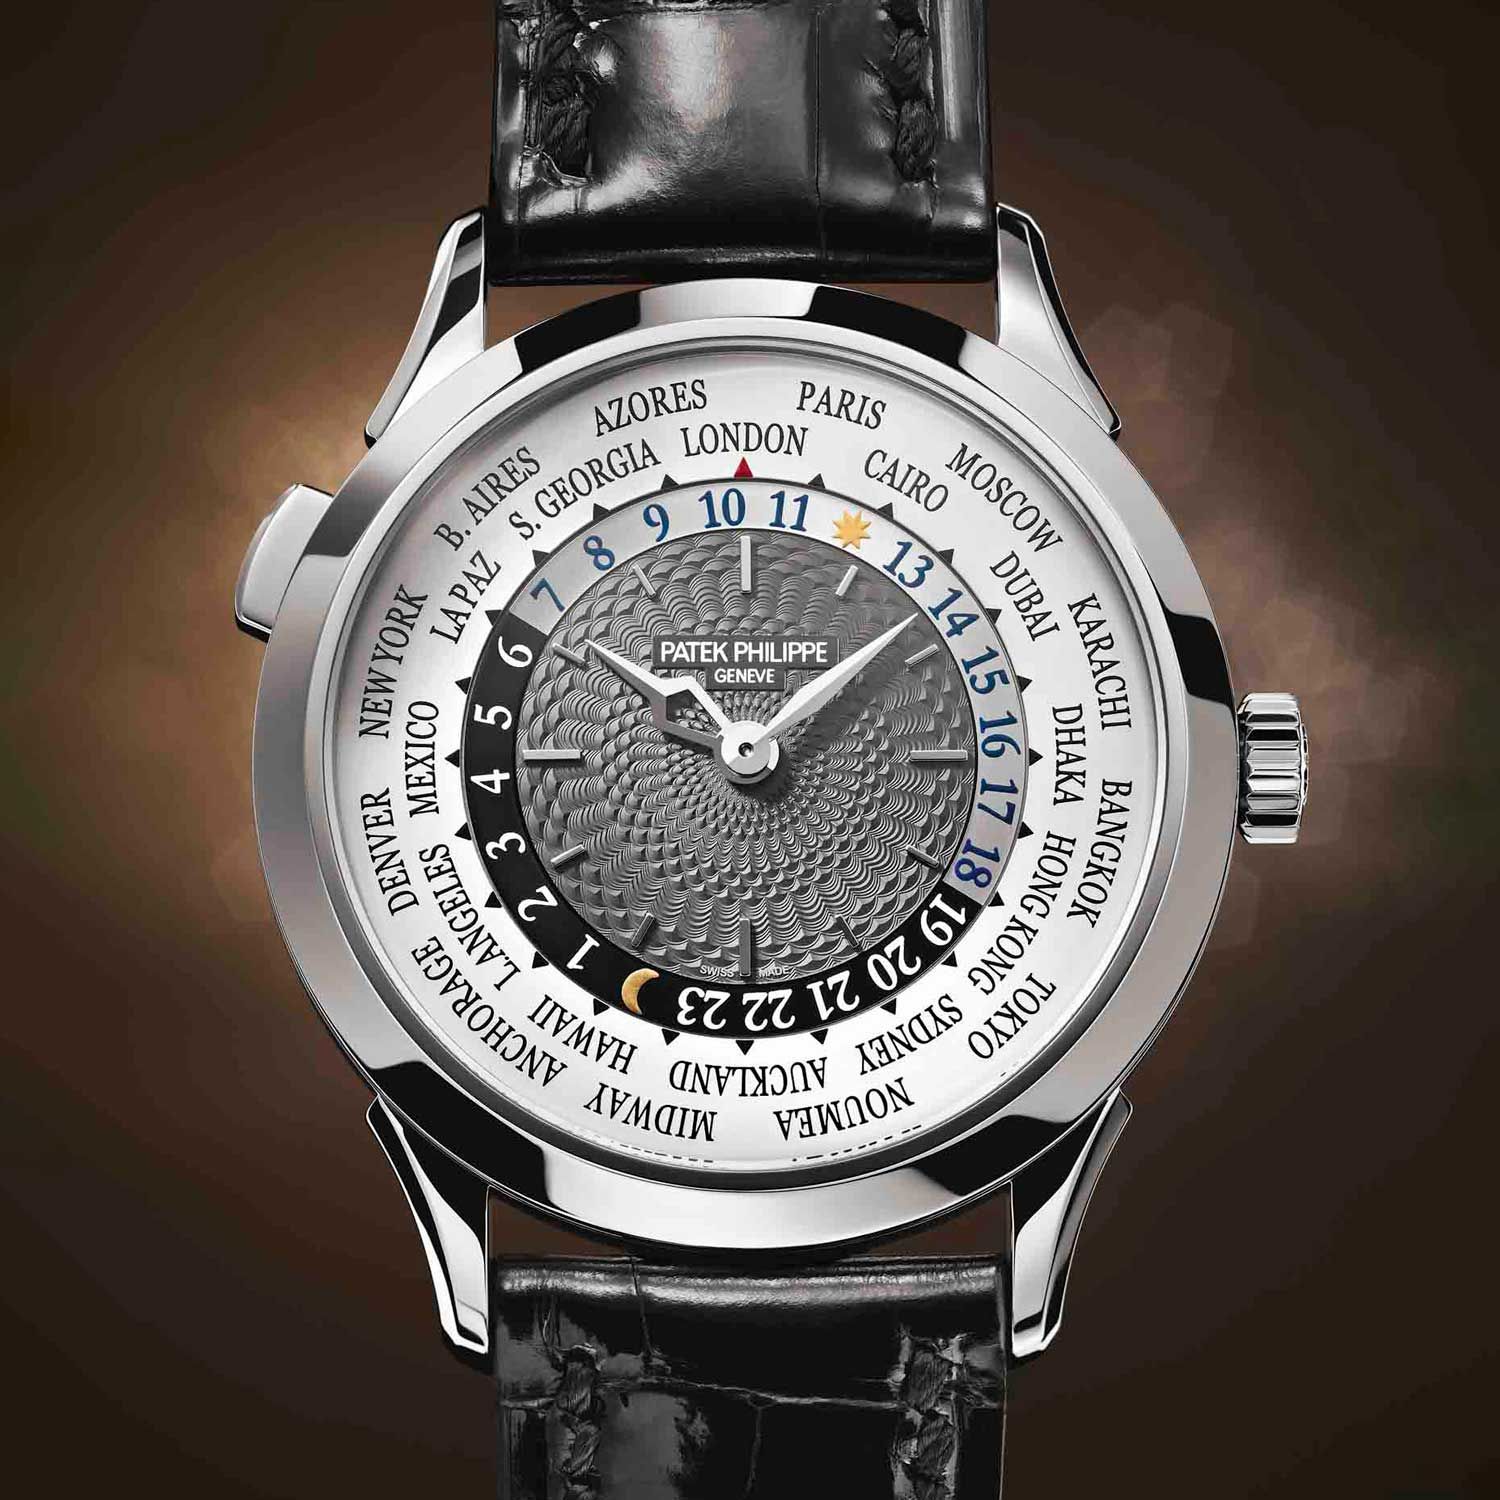 The ref. 5230 was the first modern World Timer without crown guards